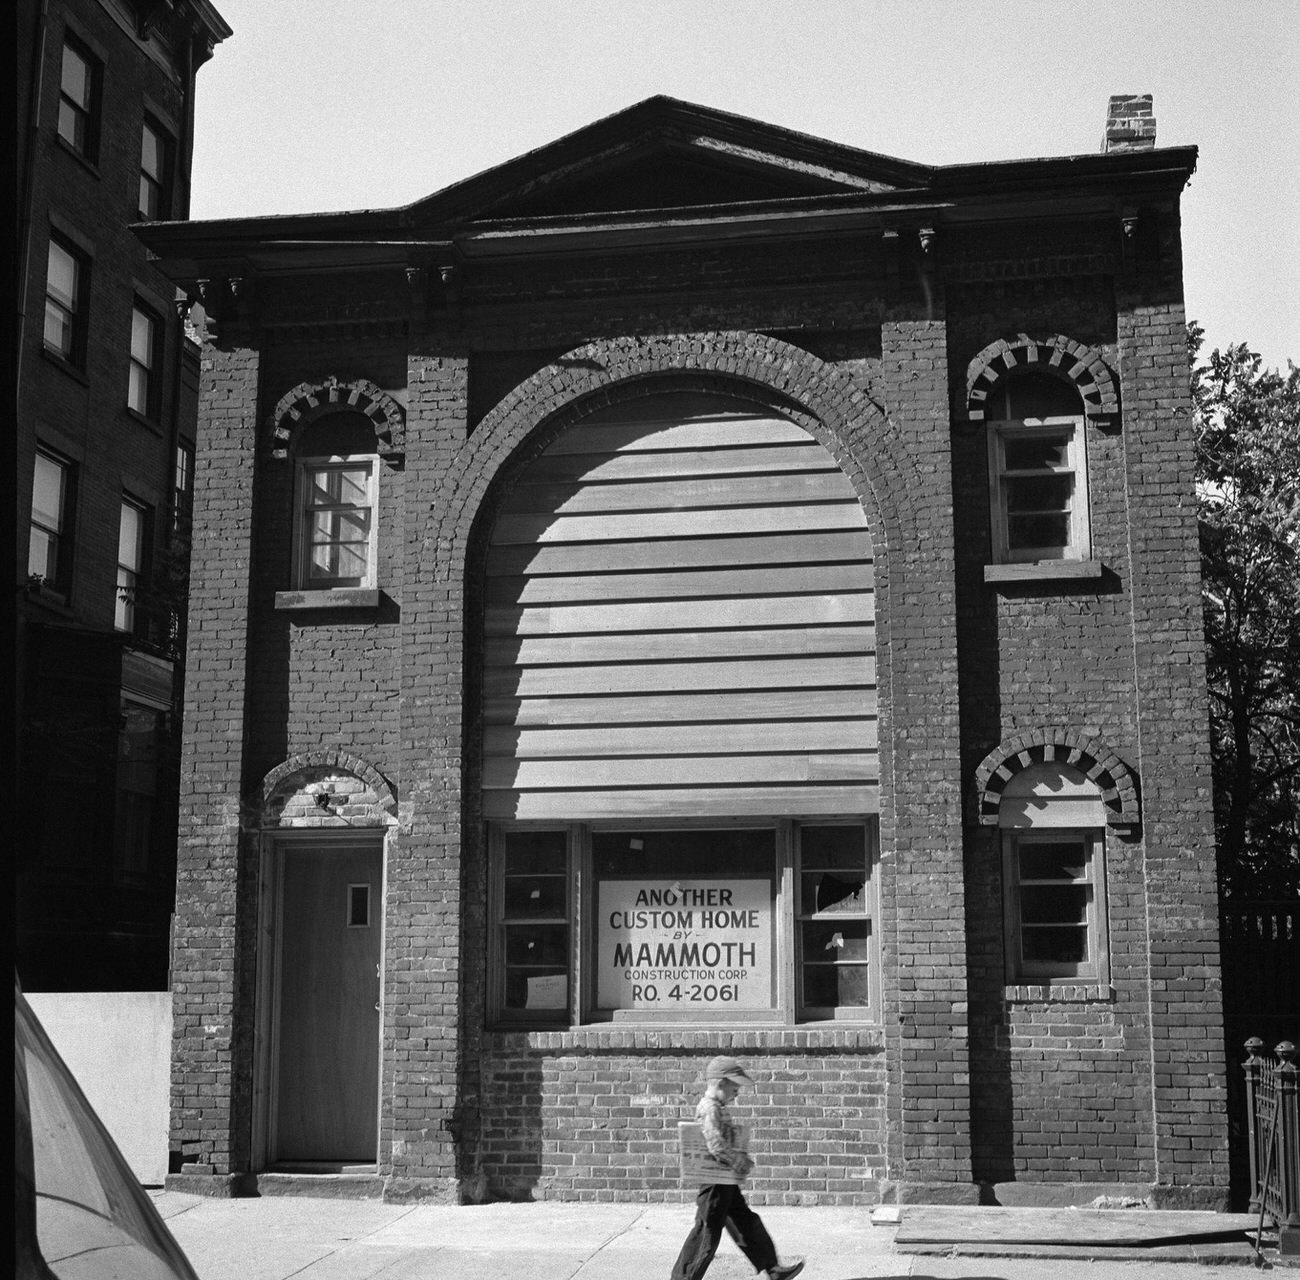 Boy With Newspaper Walks By A Historic Carriage House At 31 Pineapple Street, Brooklyn Heights, 1958.